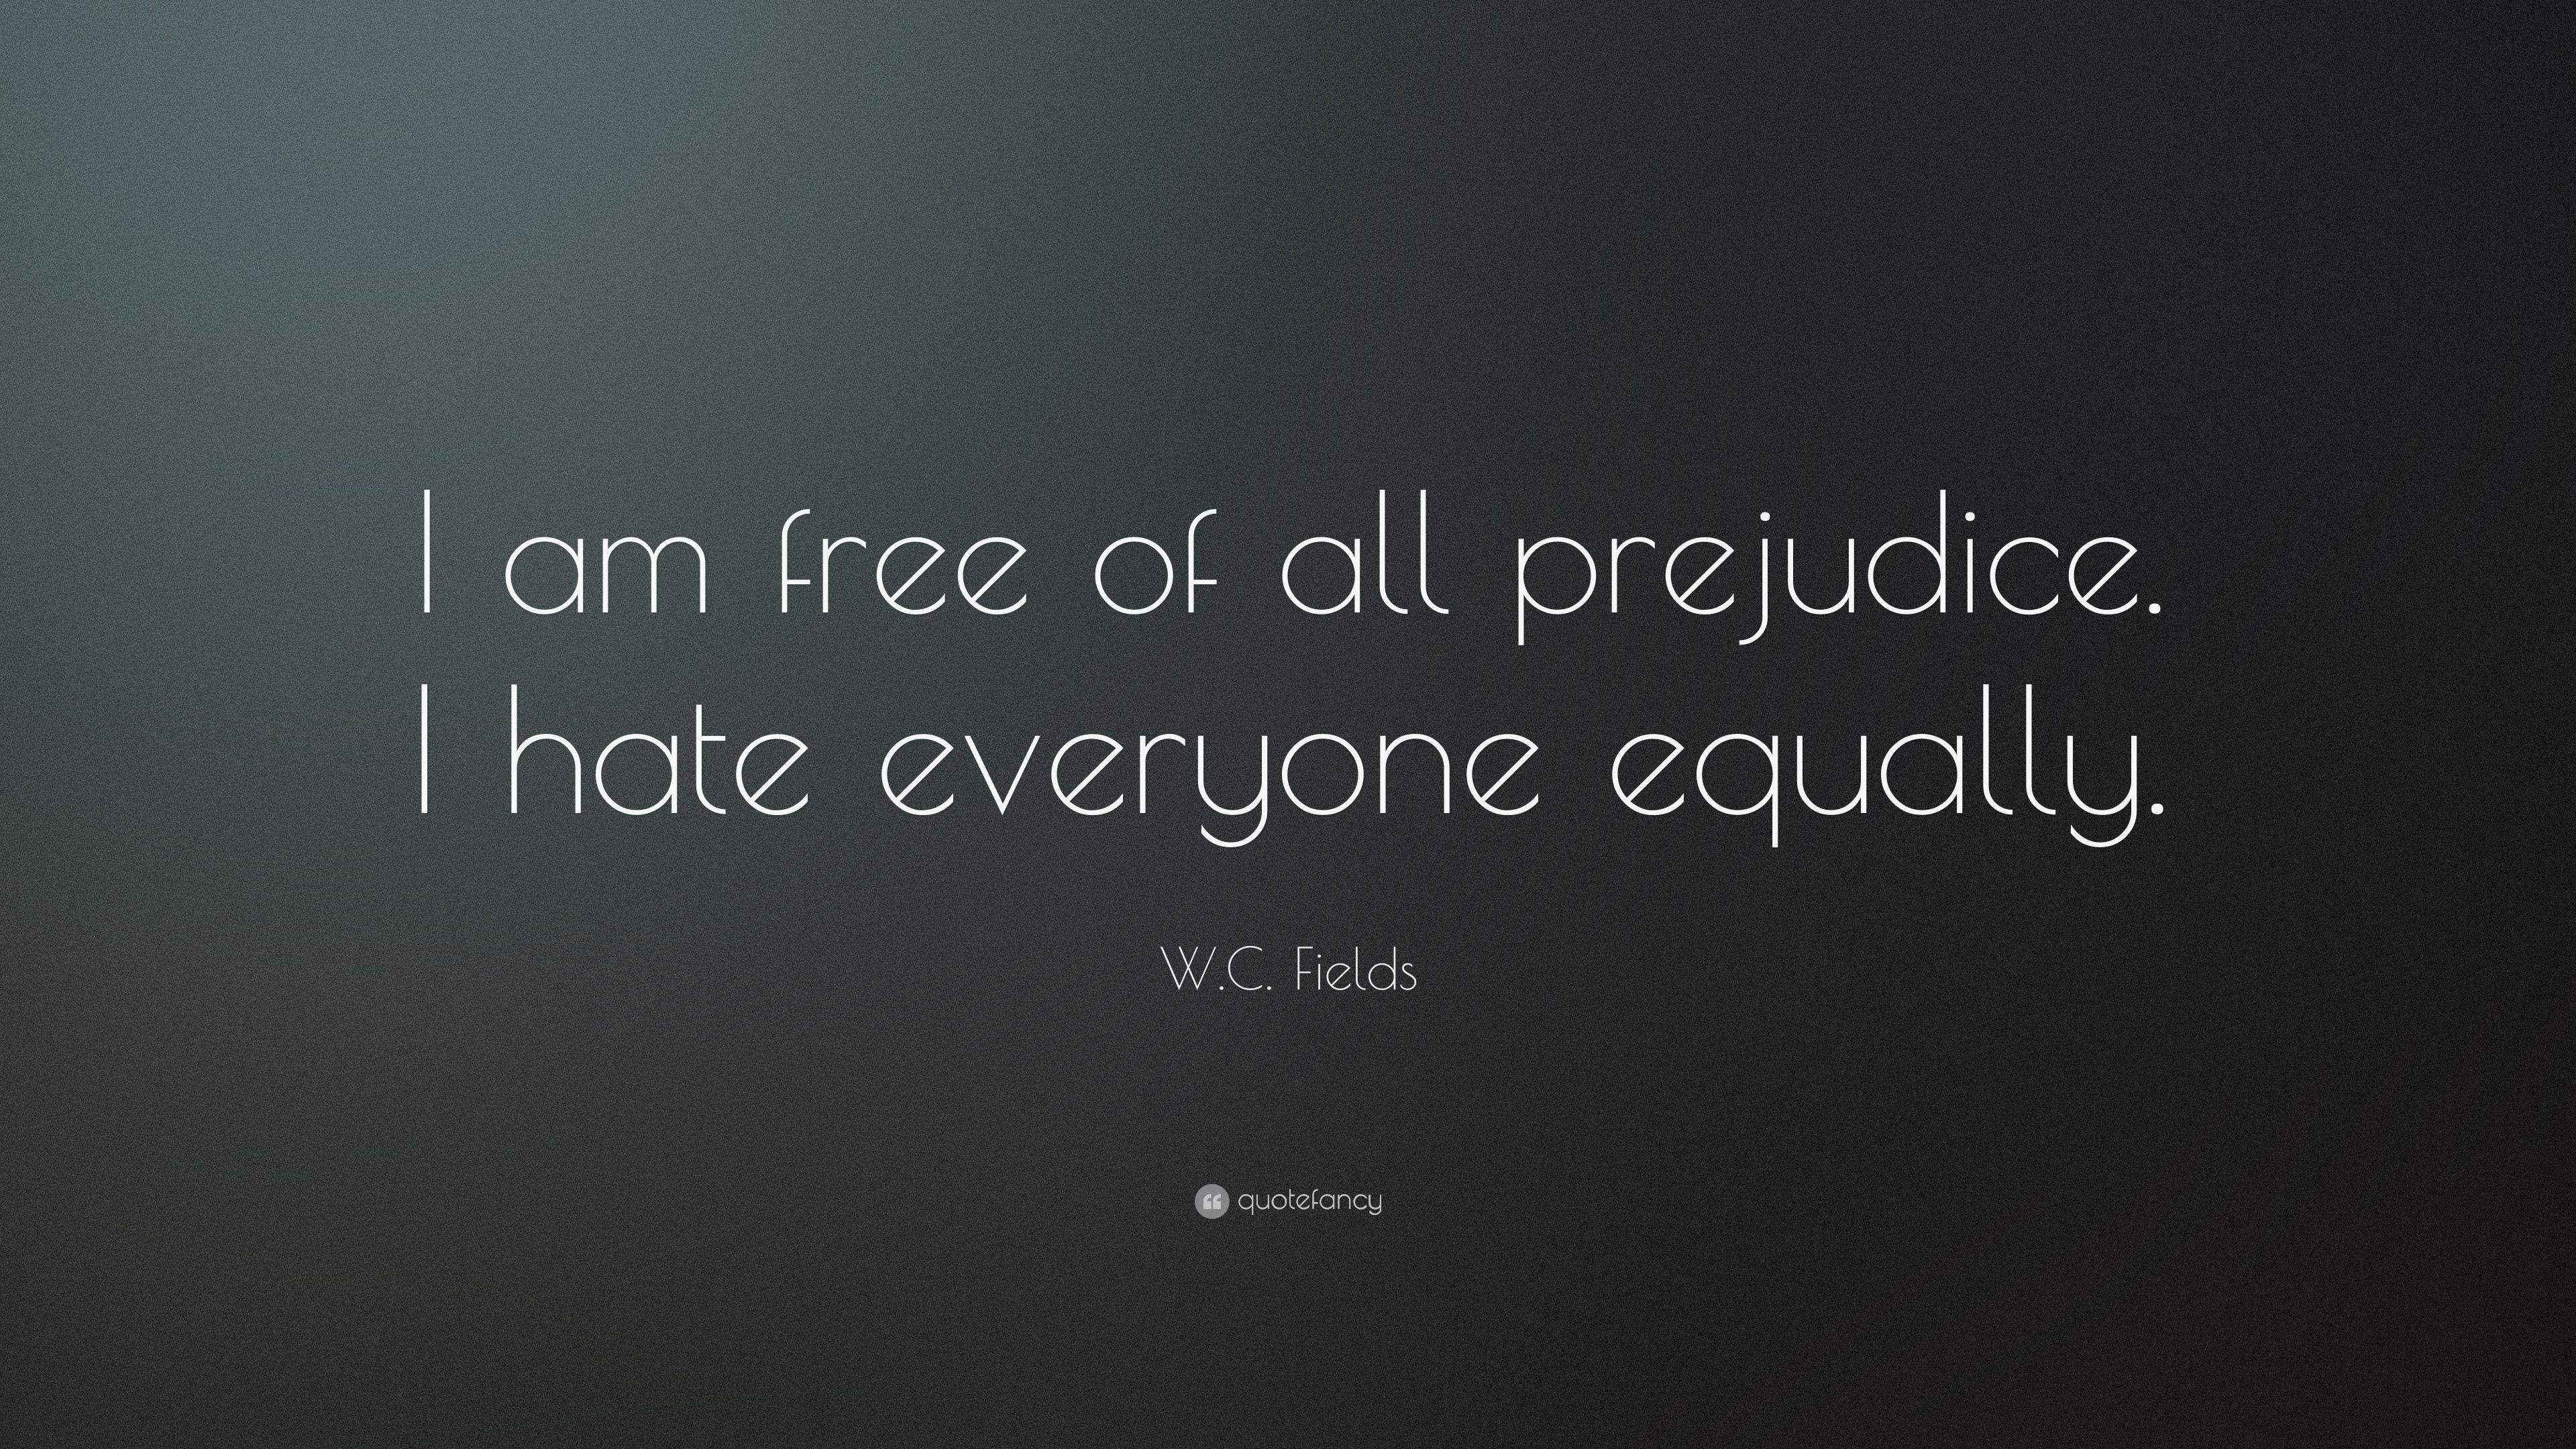 W. C. Fields Quote: “I am free of all prejudice. I hate everyone